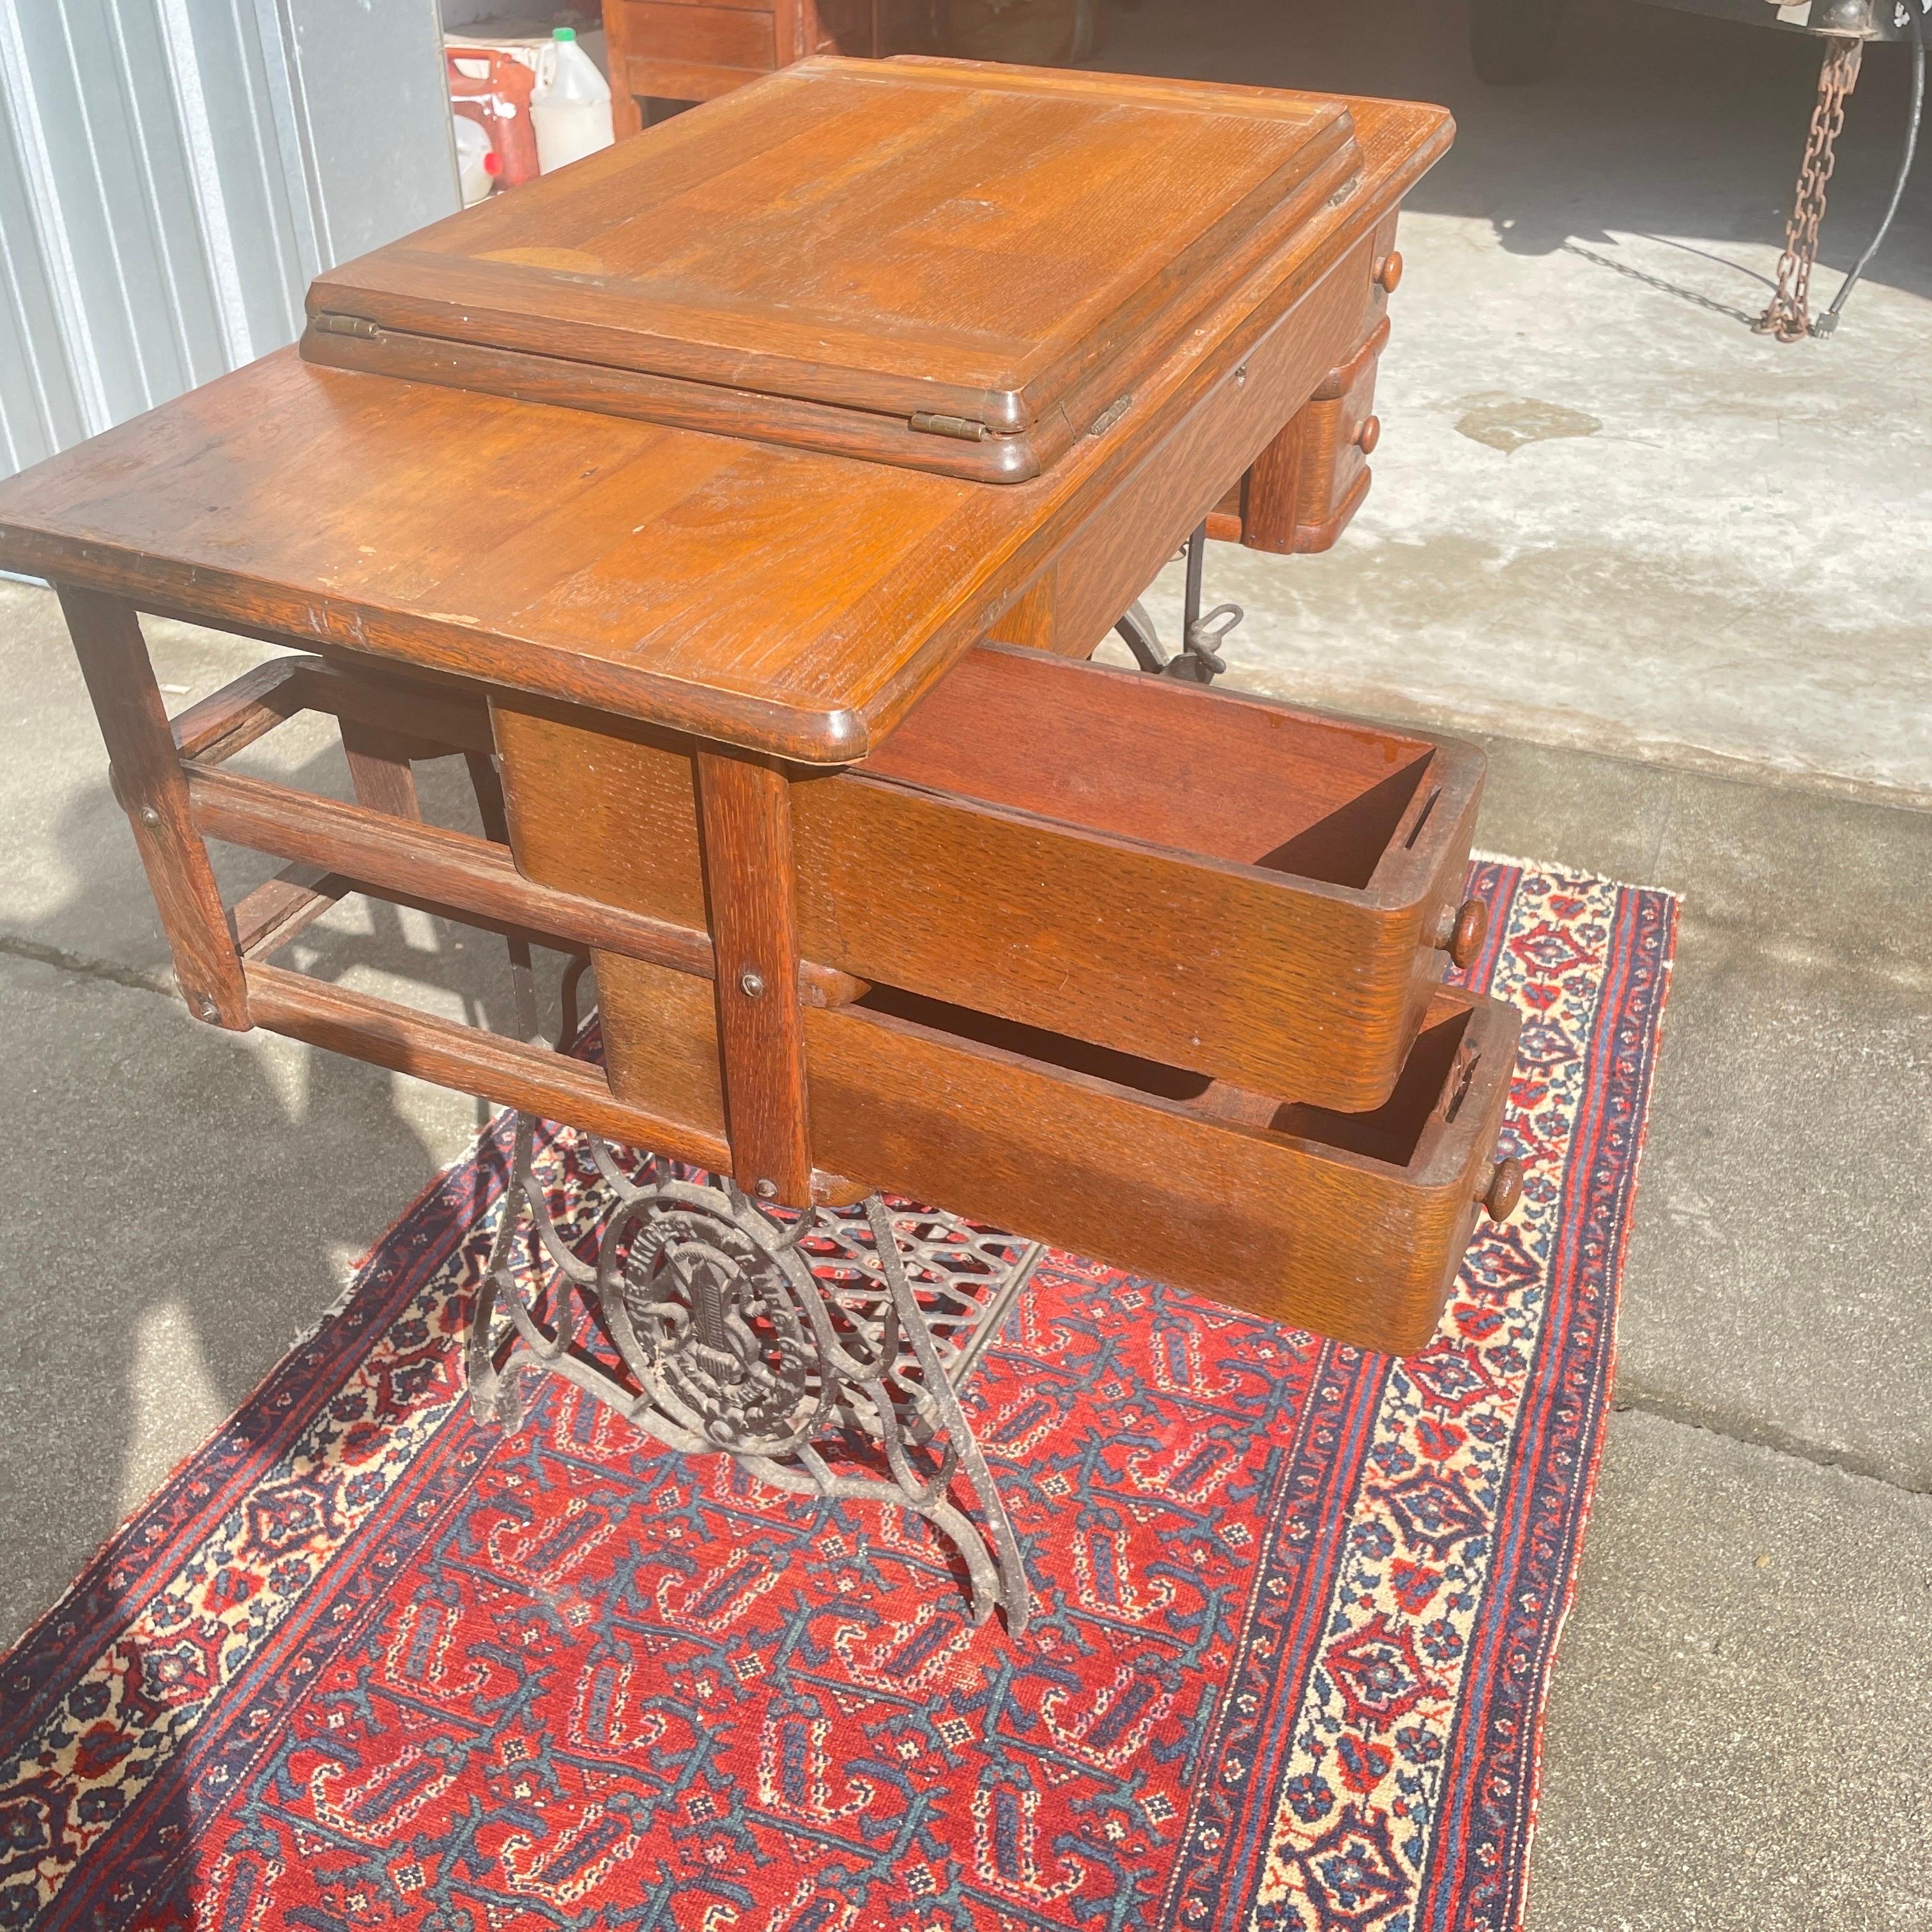 Iron Vintage Singer Sewing Machine - Work Table For Sale